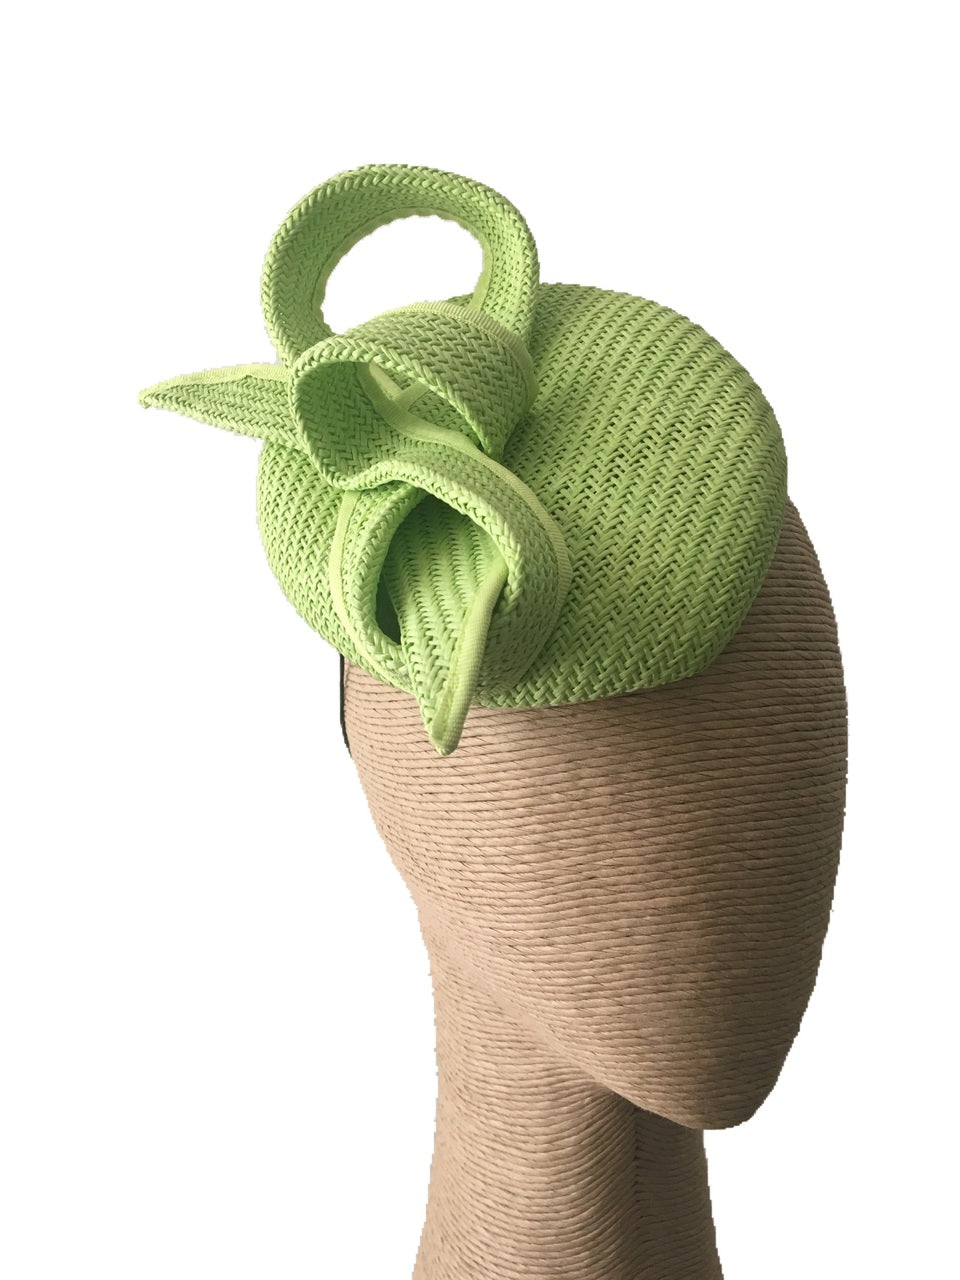 Max Alexander Buntal Straw Hat in Lime